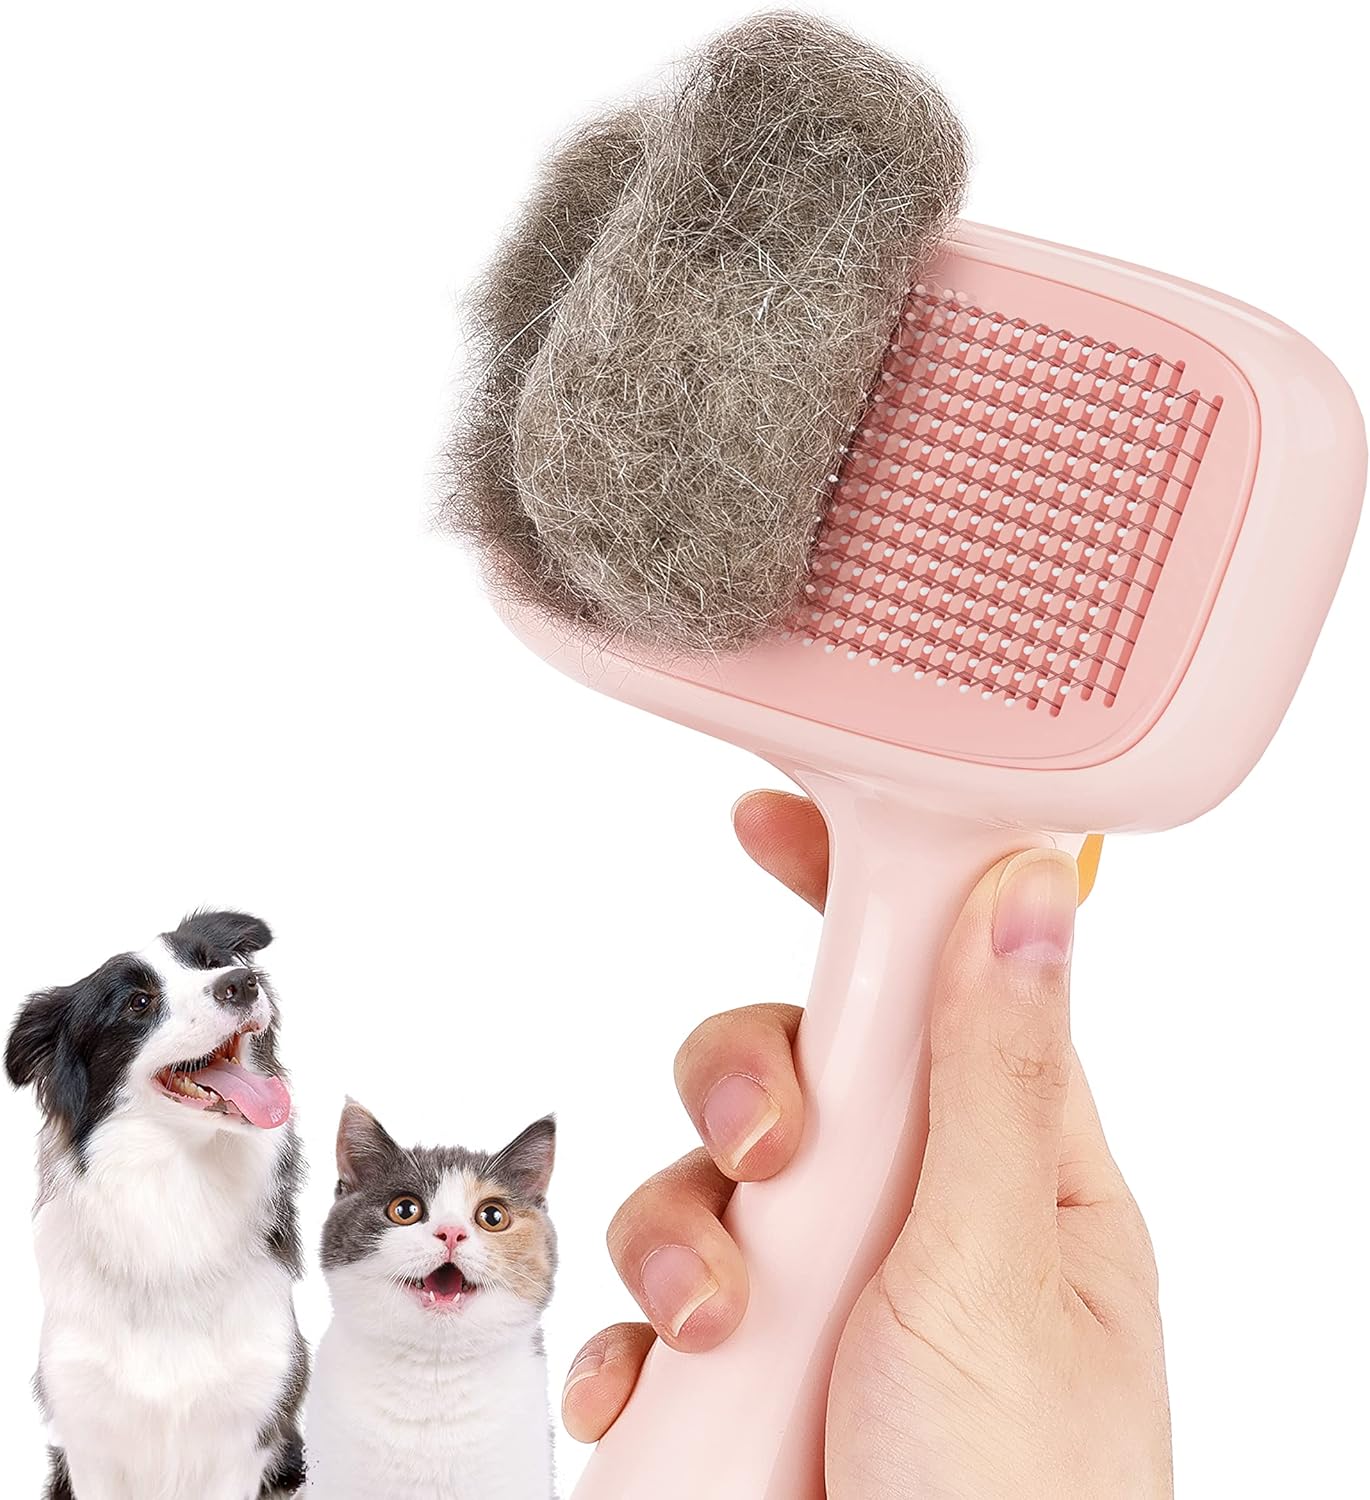 Self-Cleaning Pet Brush for Grooming and Massage, Dog Slicker Brush for Long and Short Hair for Shedding, Dog Grooming Brush Suit for Small to Large Breed to Remove Mats (Pink)